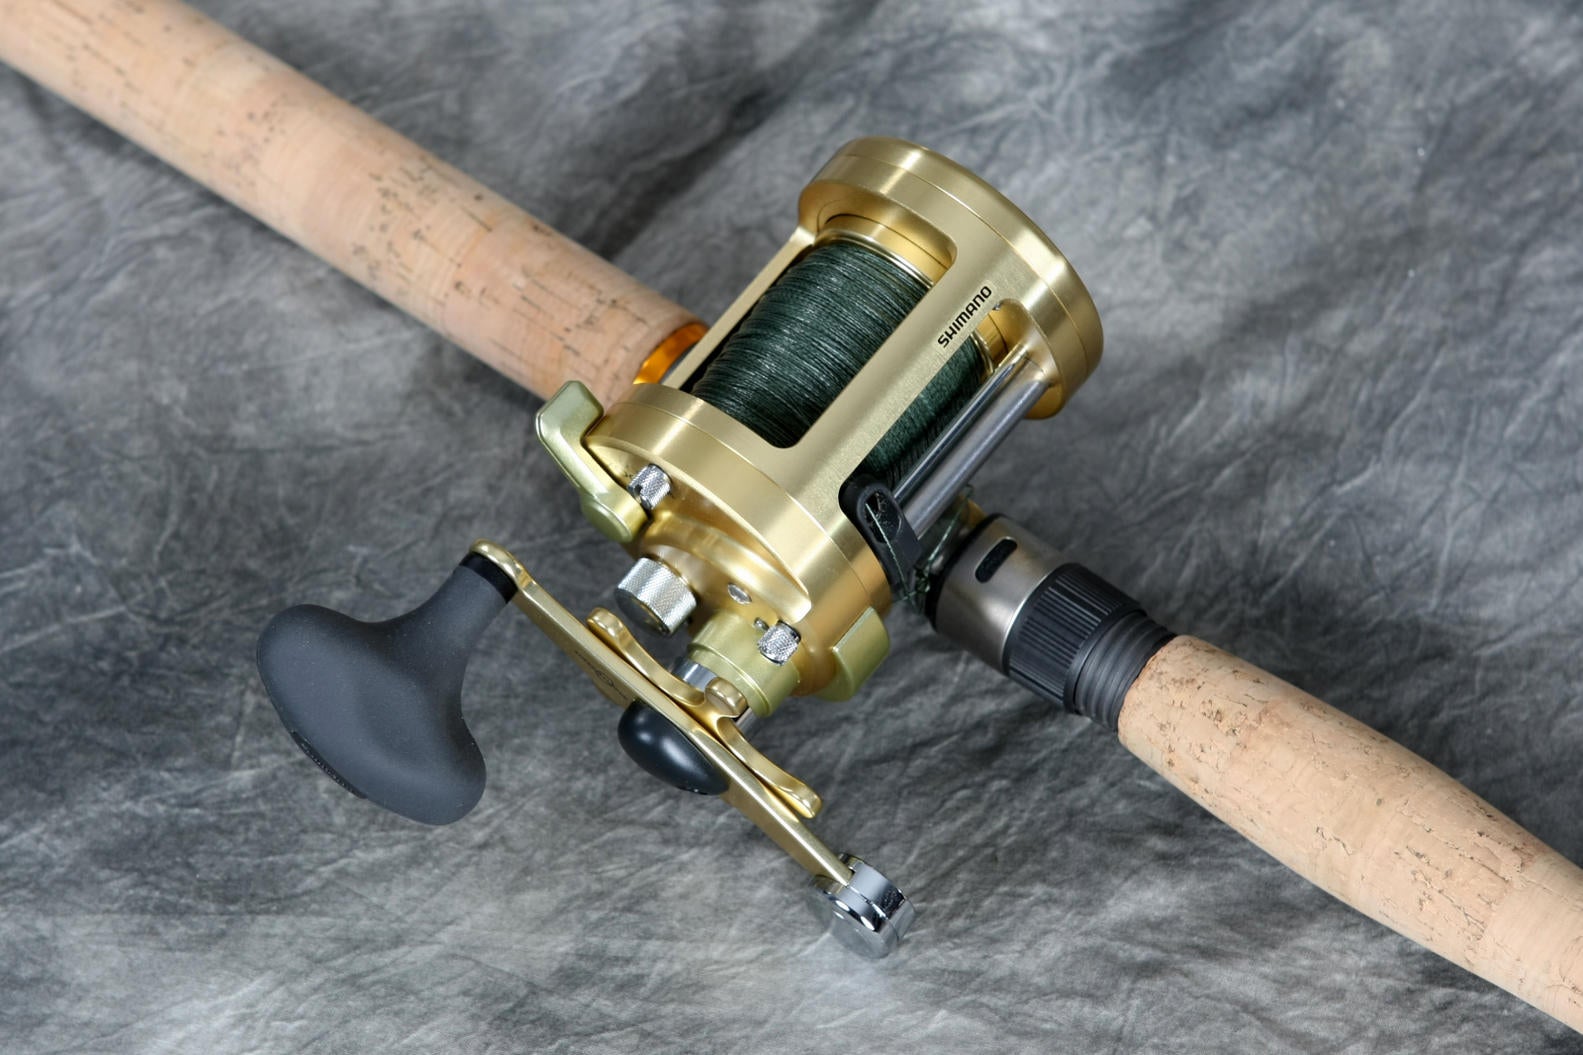 TEAM CATFISH Brand shows a new catfishing reel at ICast tackle